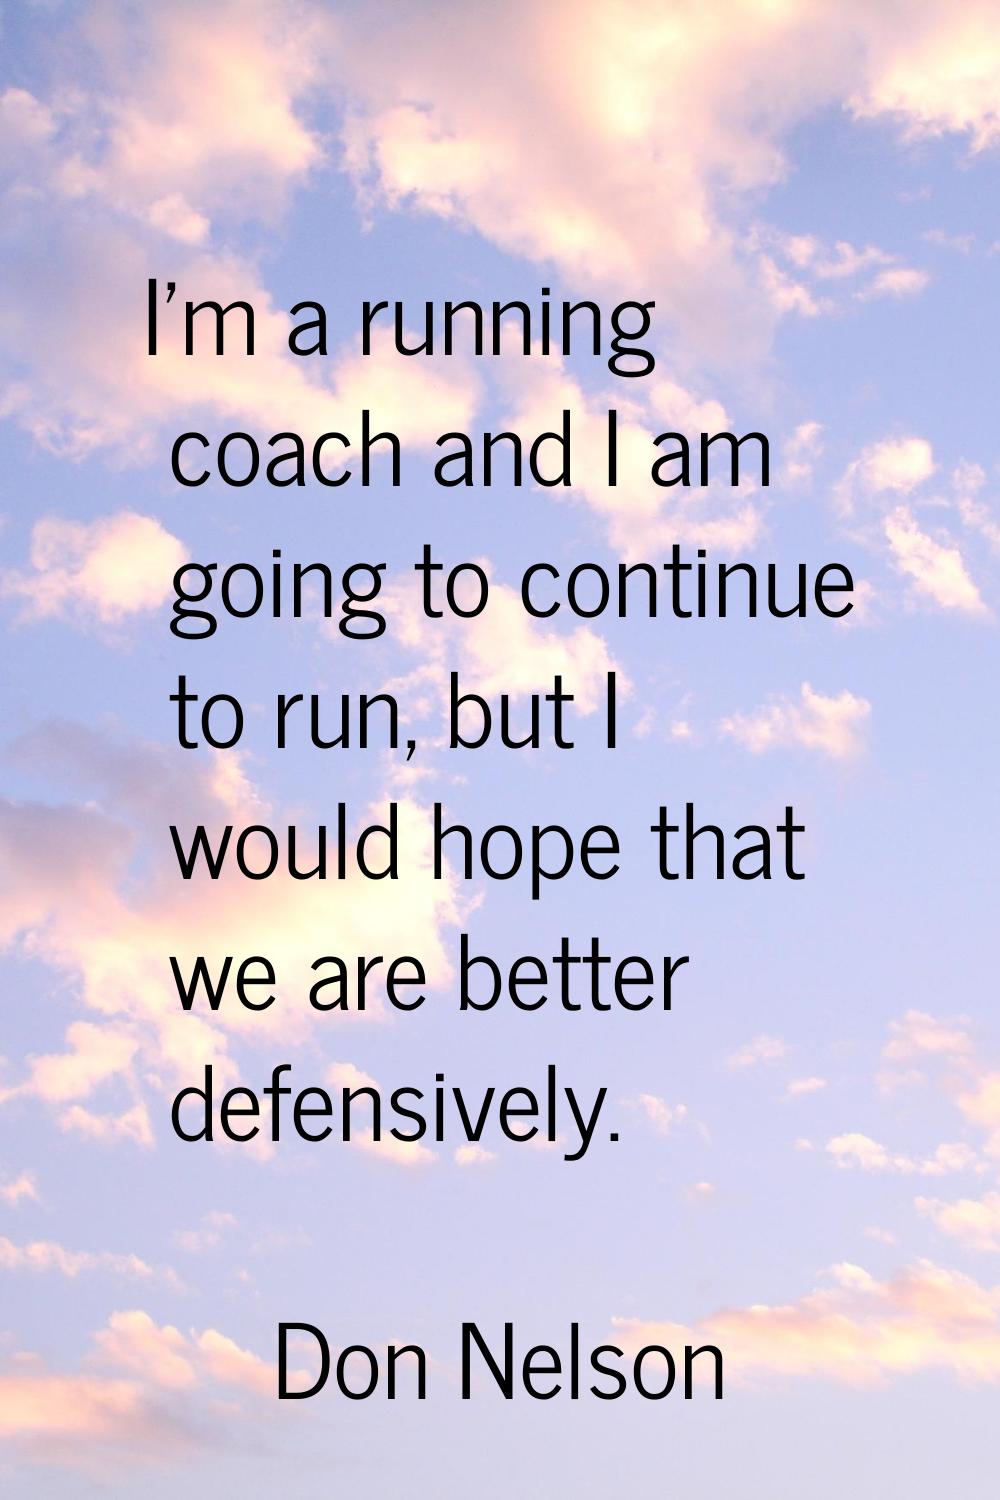 I'm a running coach and I am going to continue to run, but I would hope that we are better defensiv